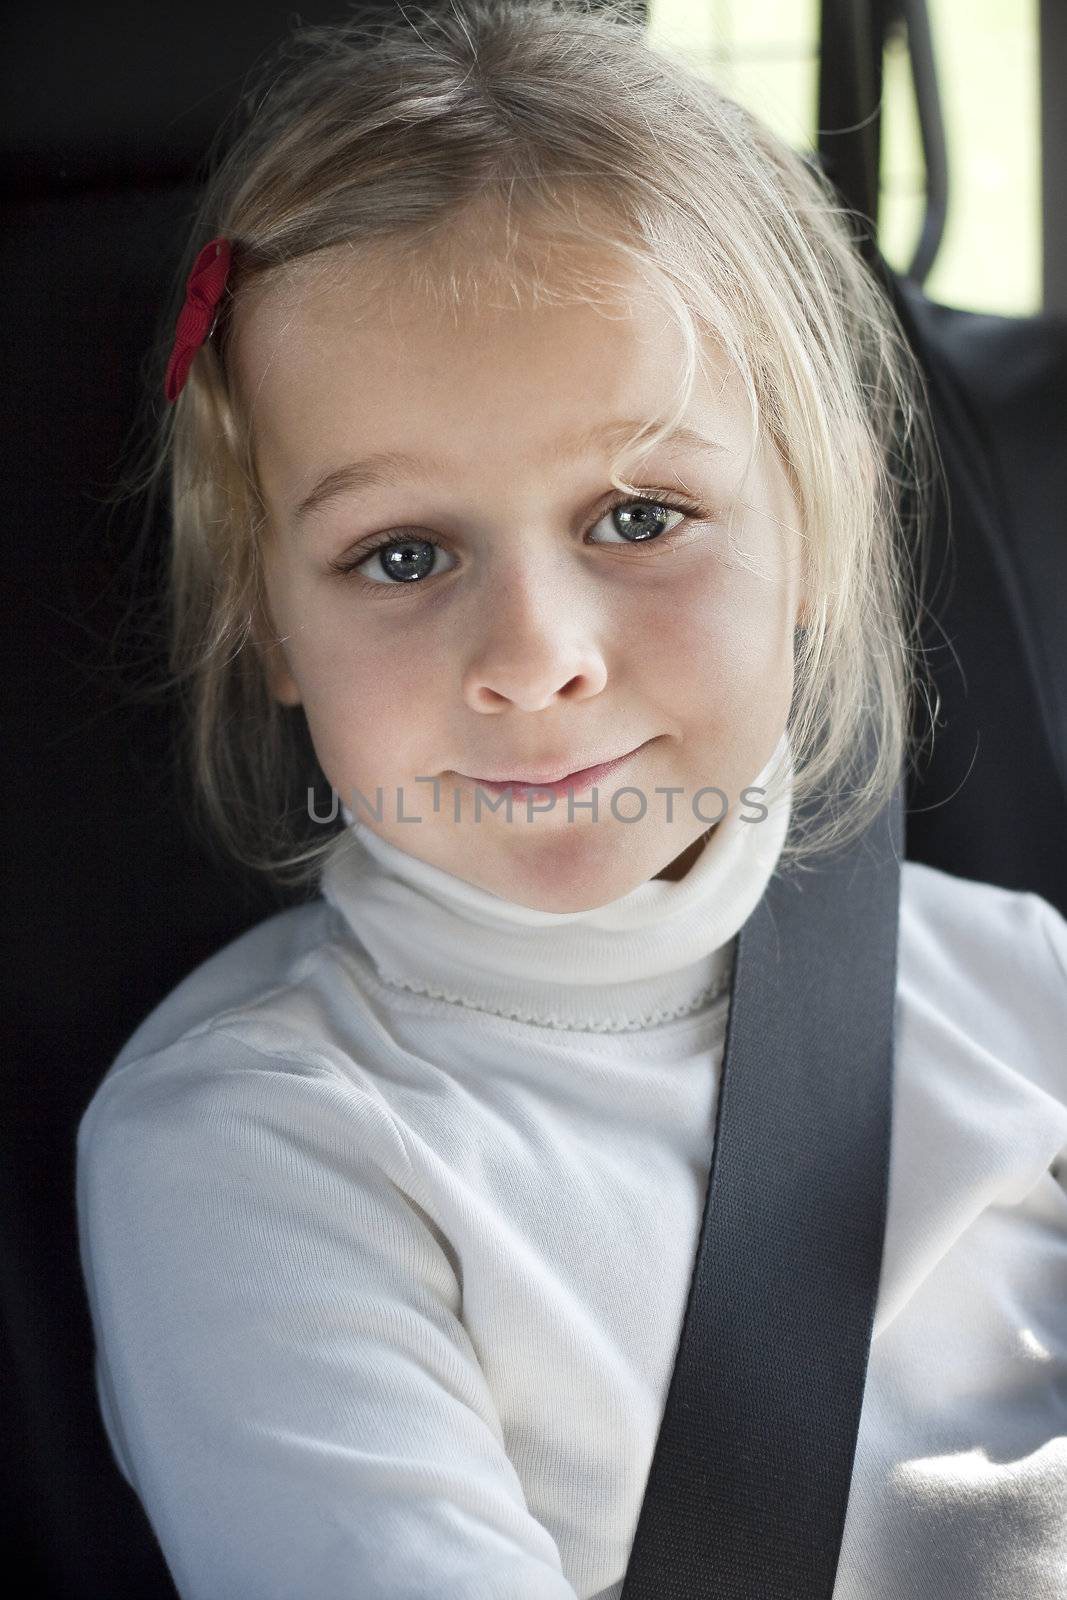 A smiling girl with seat betl in a car